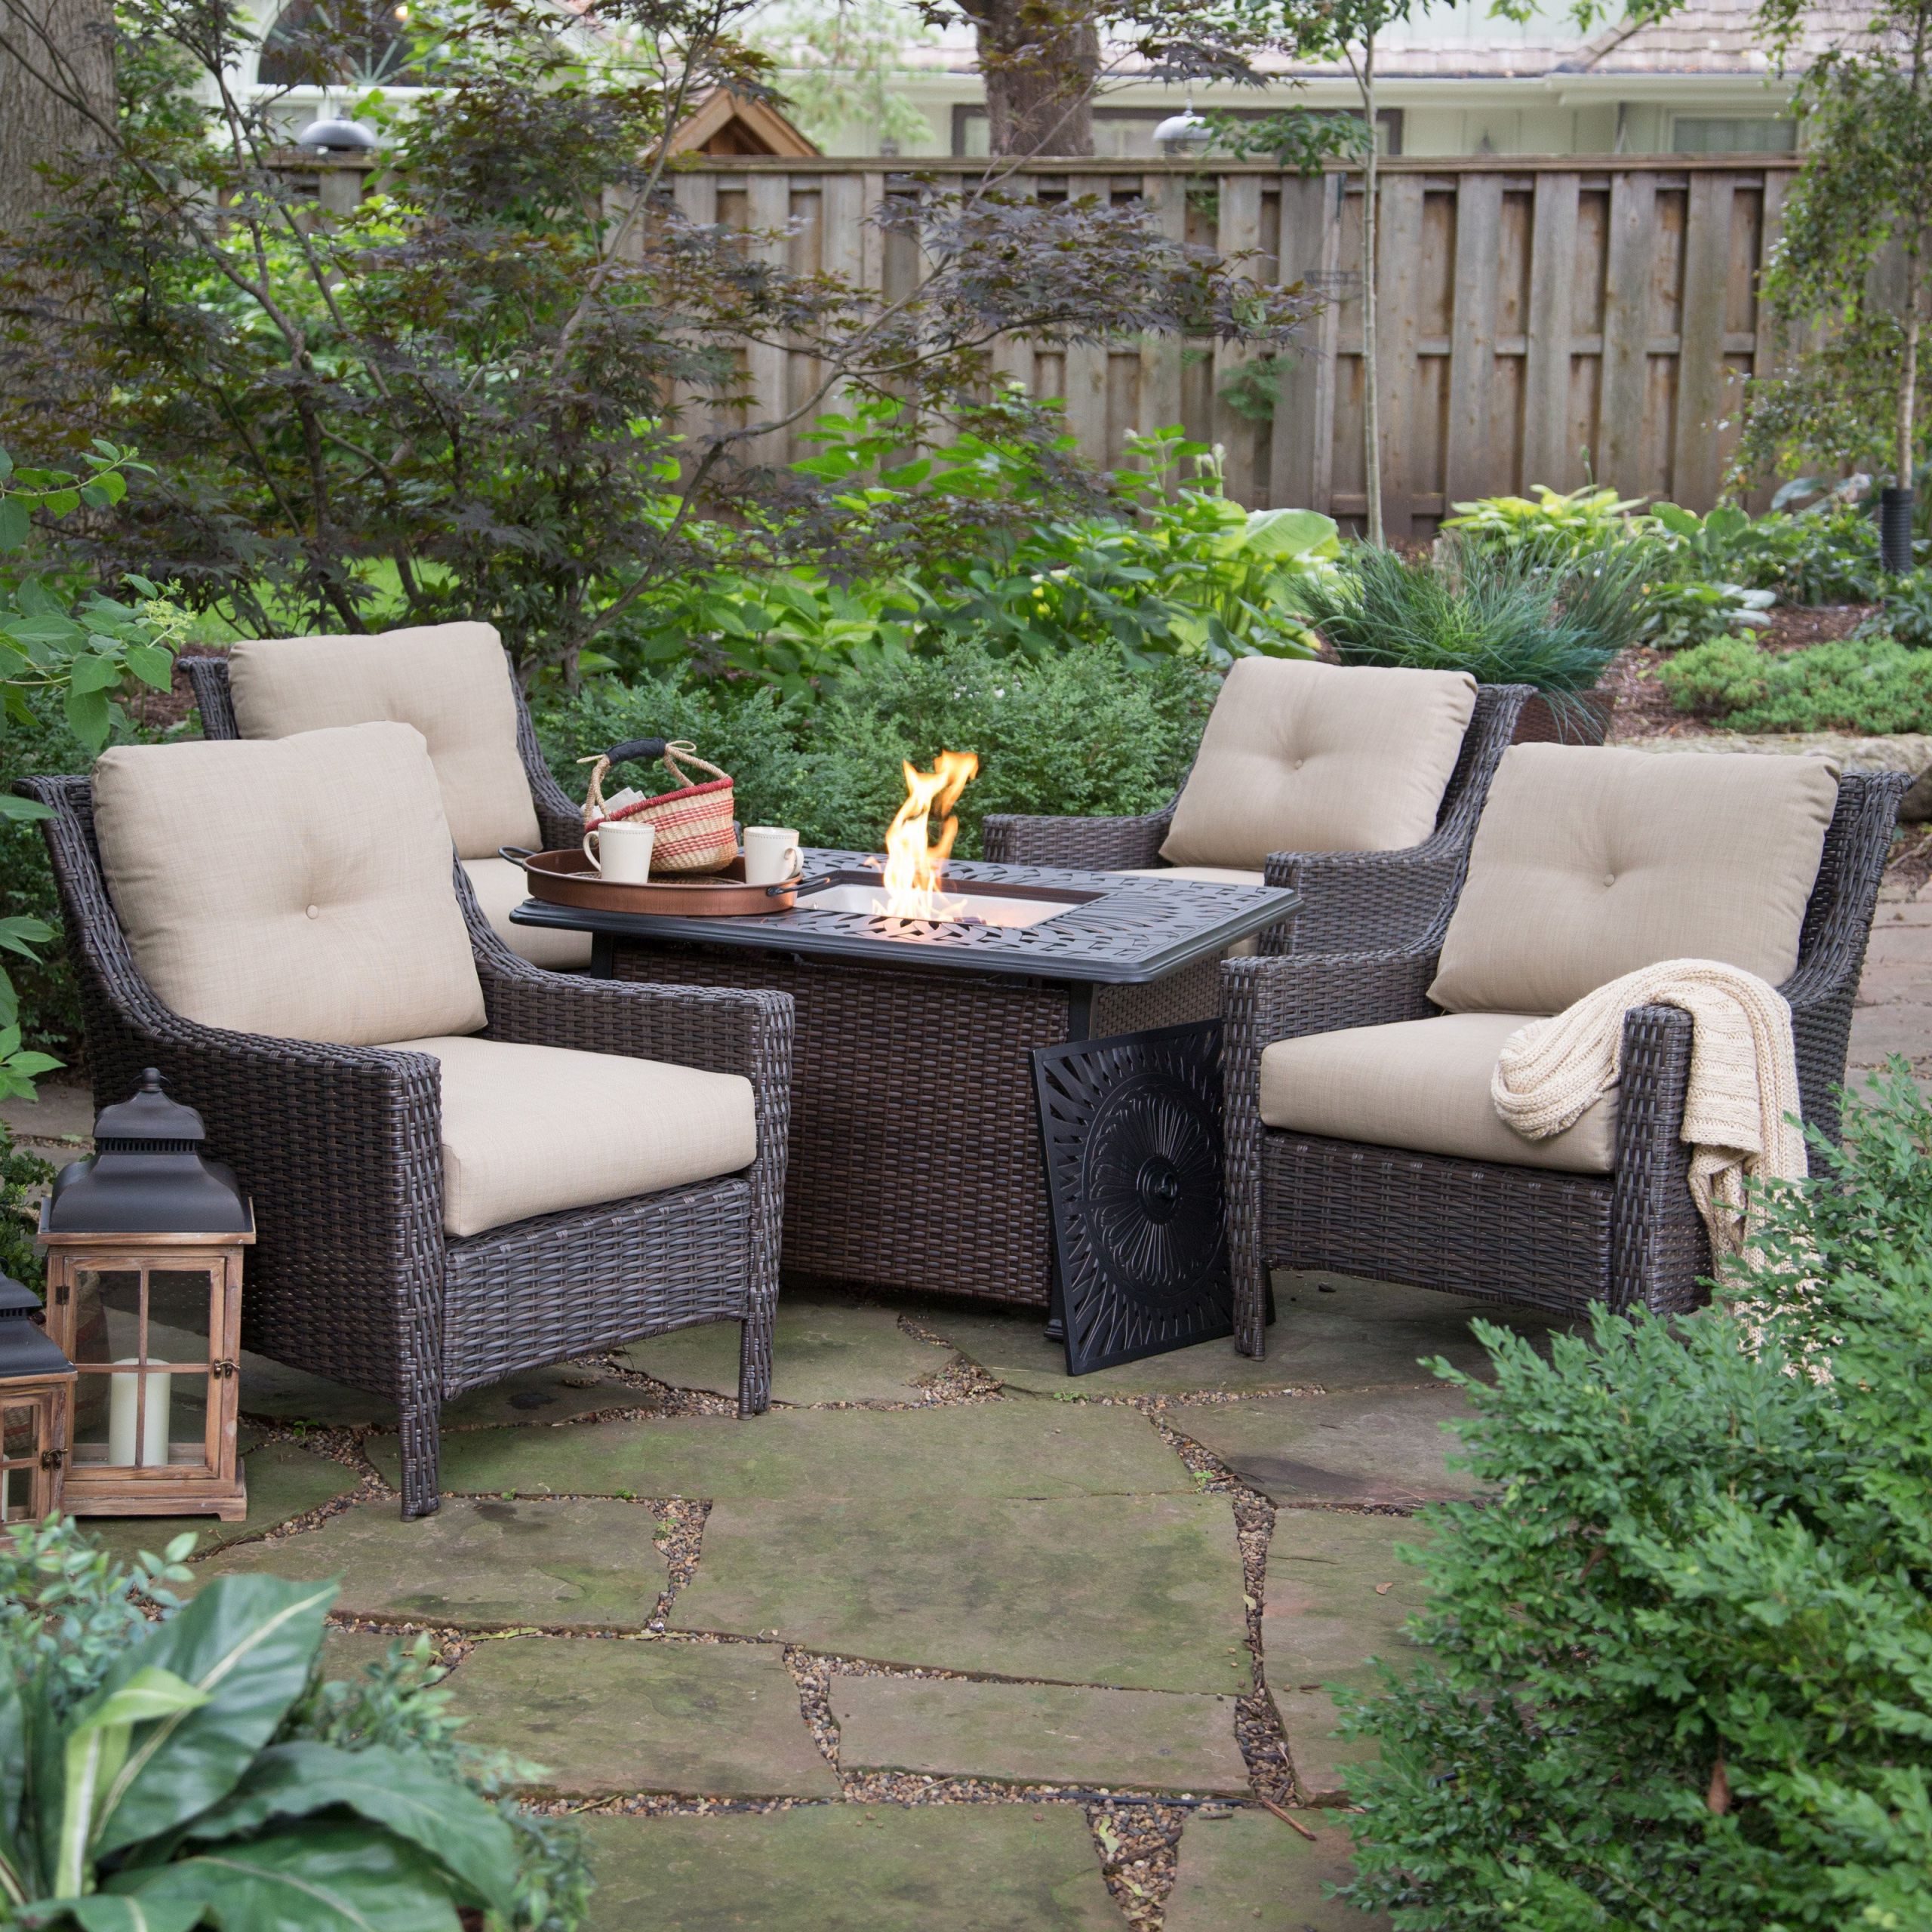 Patio Set With Fire Pit
 Belham Living Springfield Wicker Chat Set with Florentine